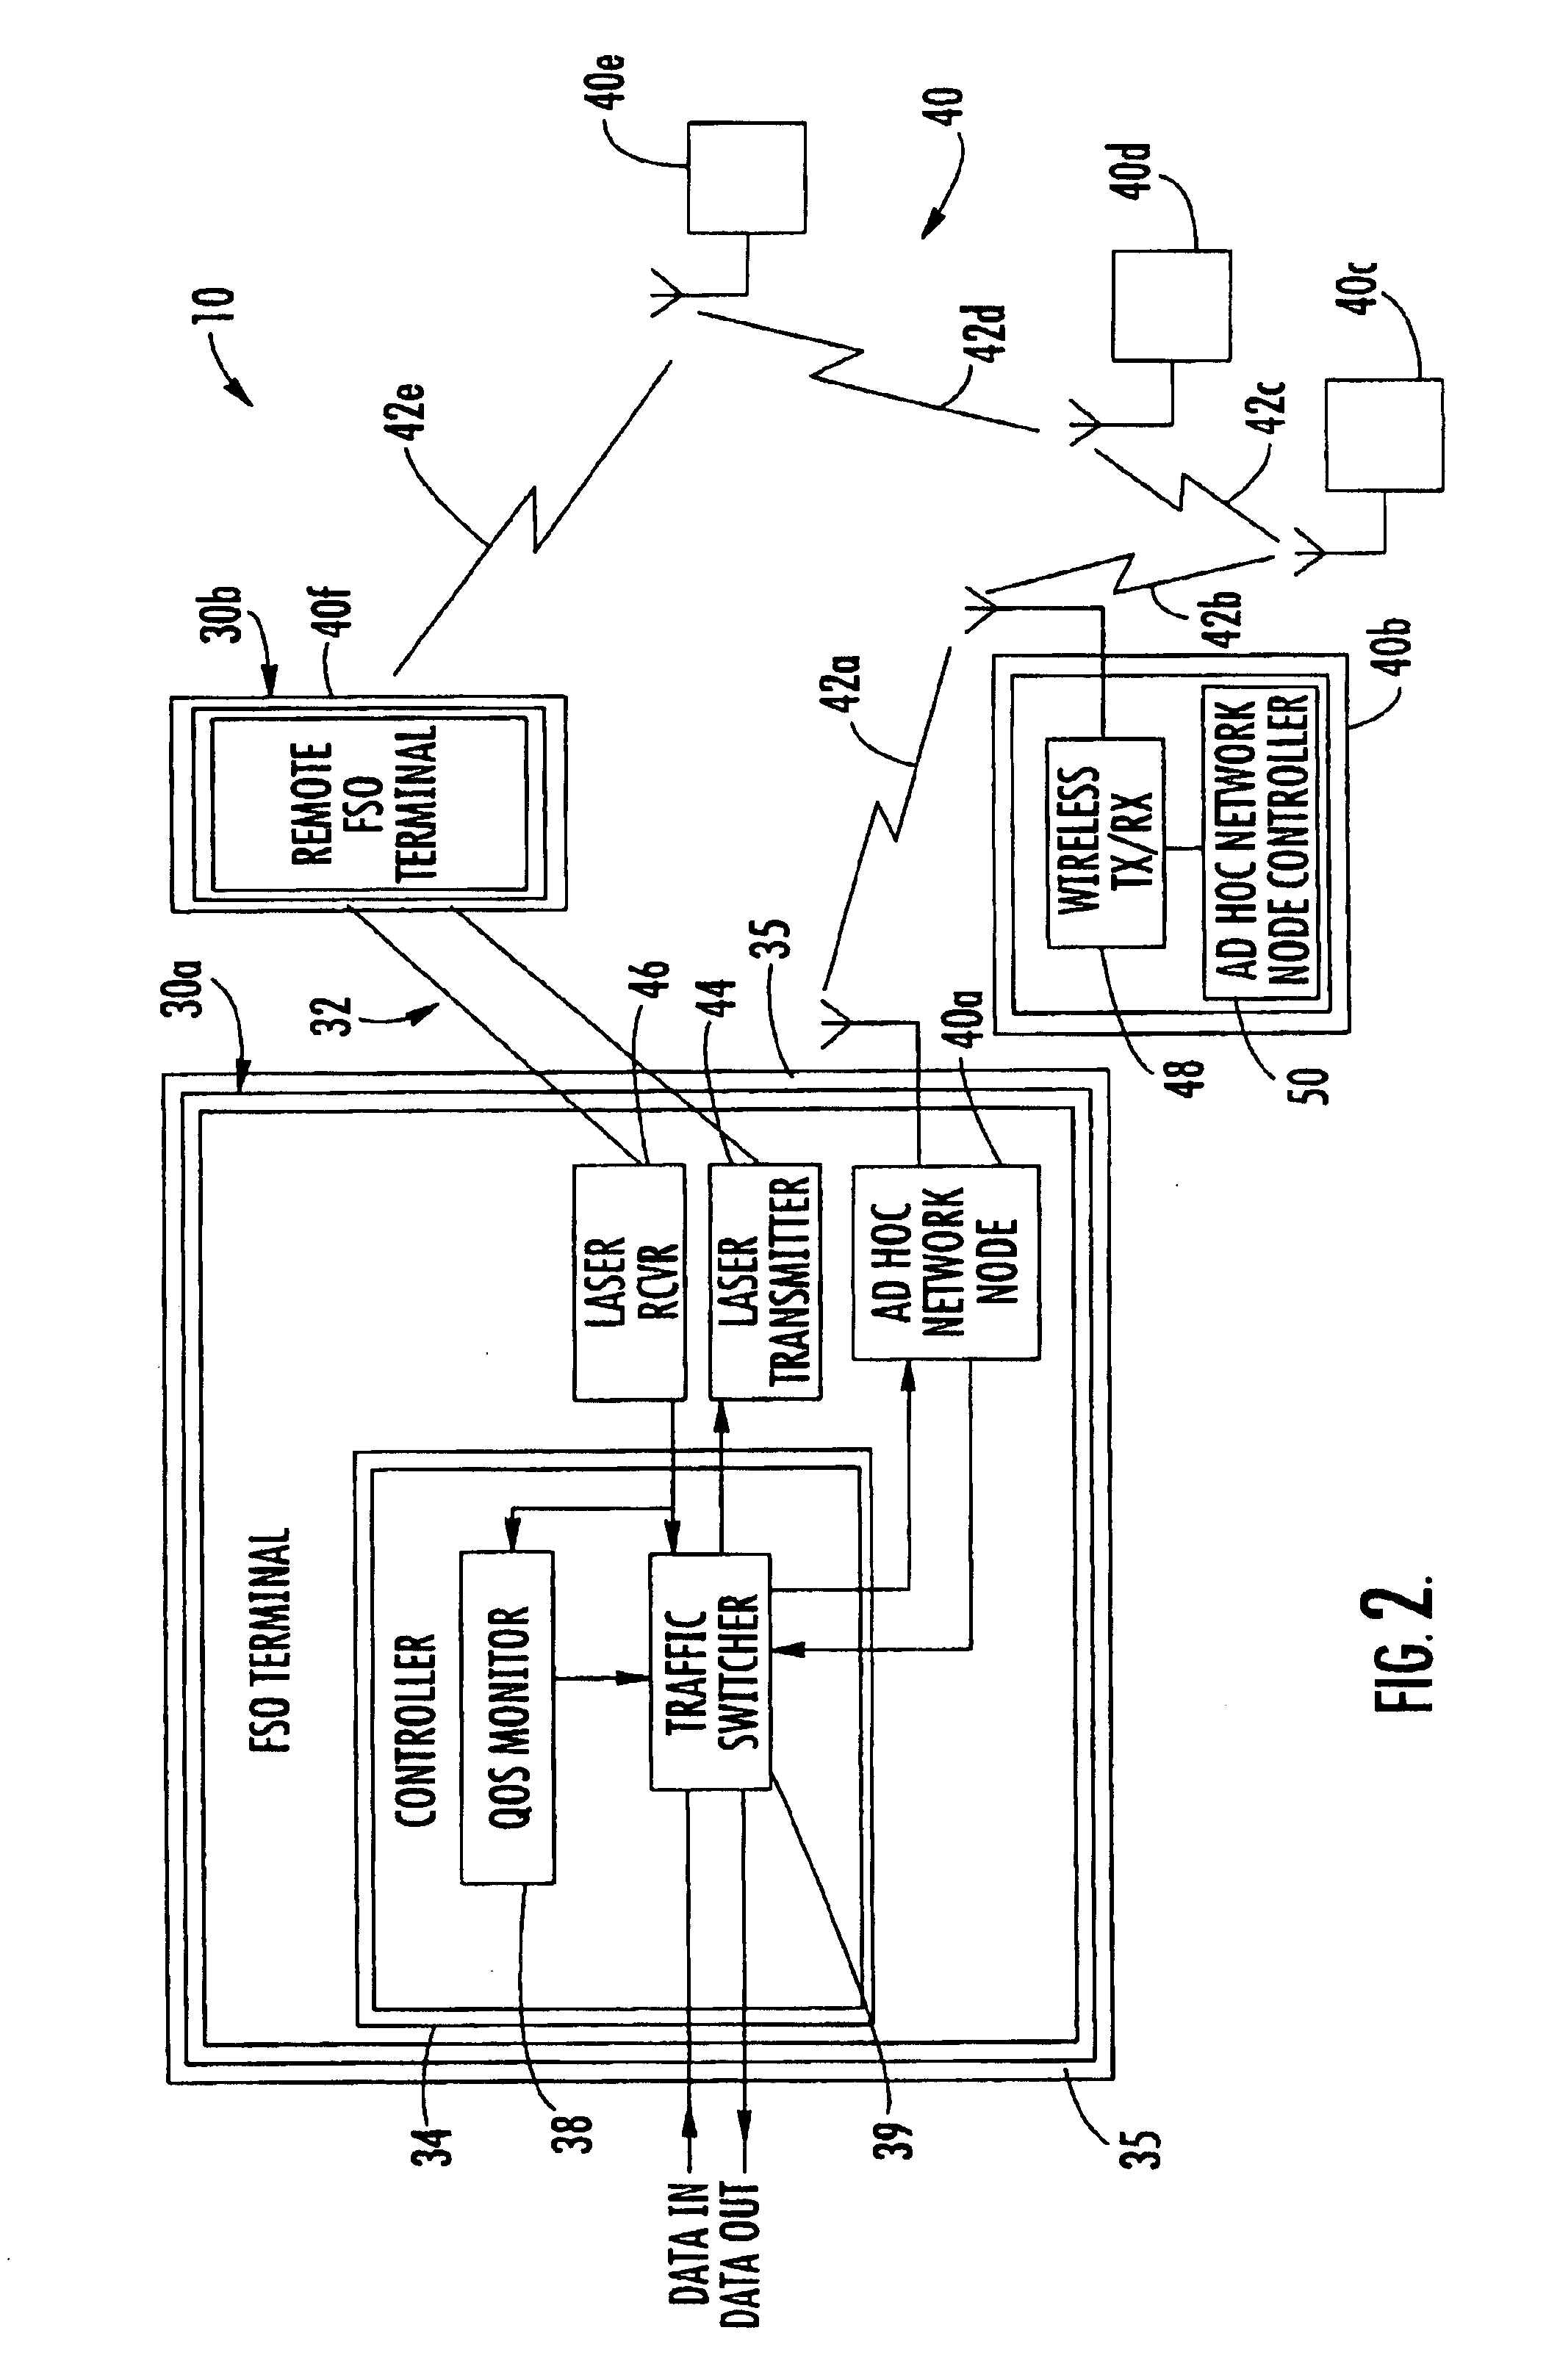 Free space optical terminal with ad hoc network back-up and associated methods